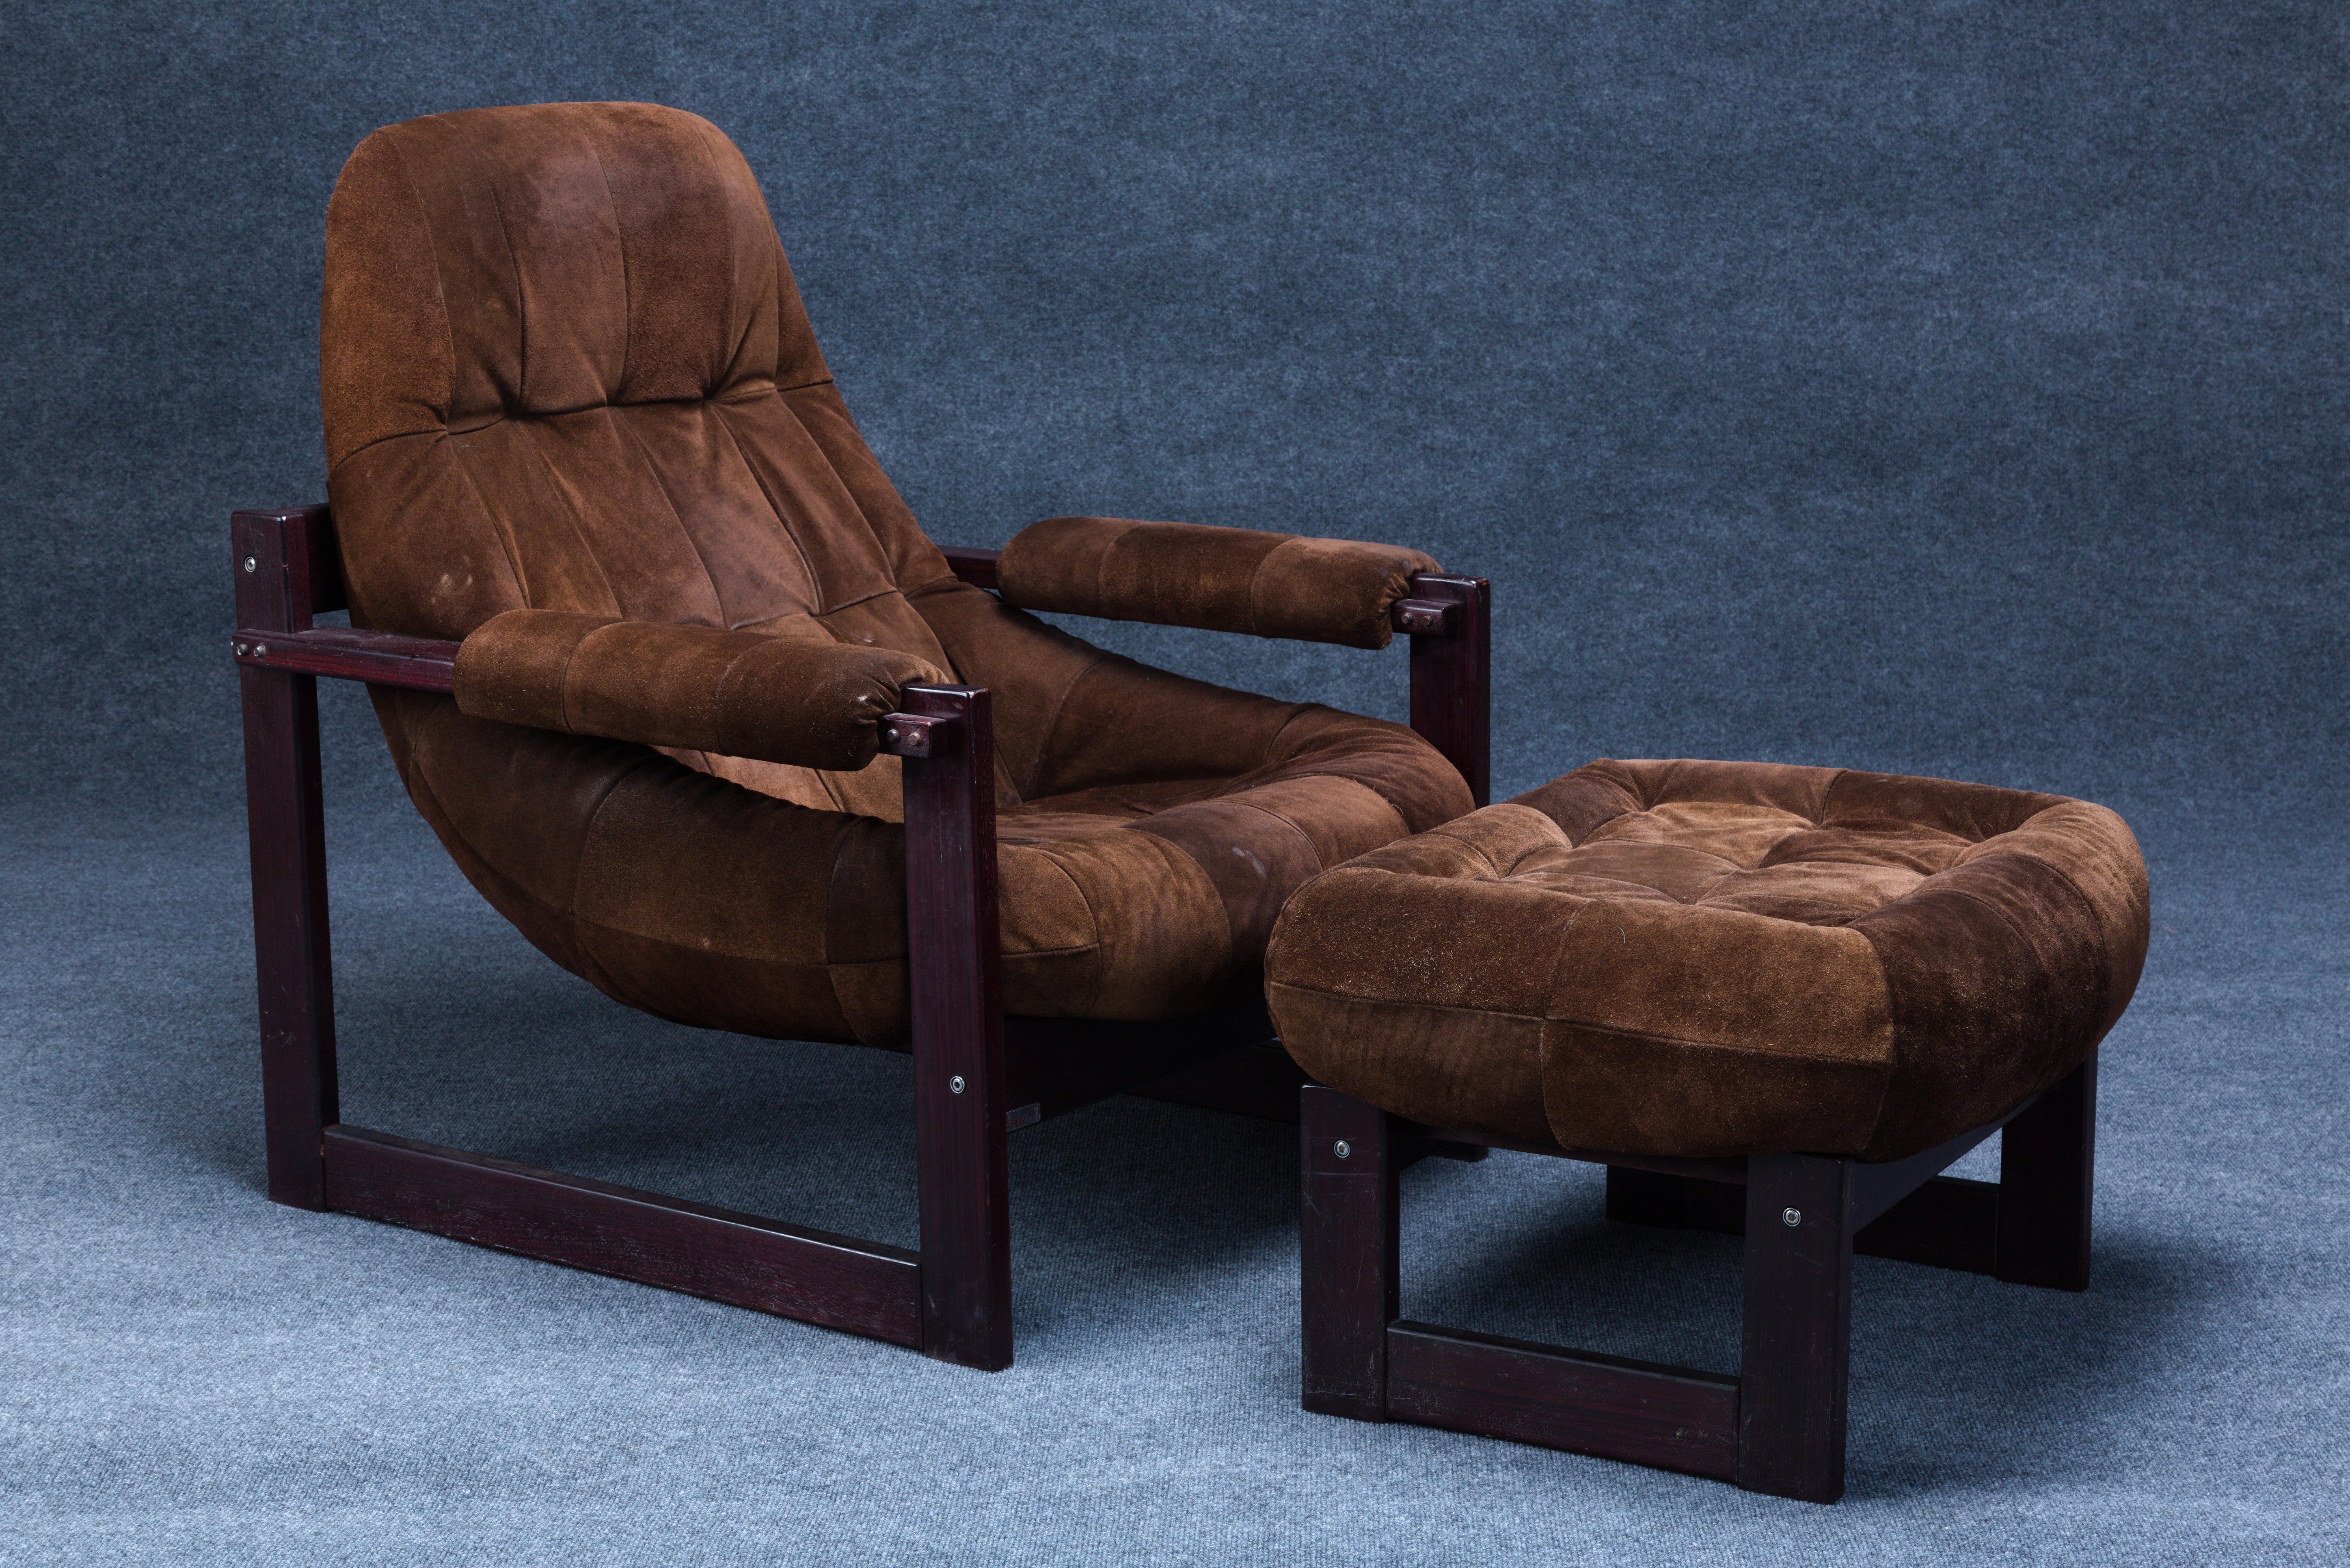 Brazilian Mid-Century Modern Armchair/Ottoman by Percival Lafer in Suede Leather For Sale 3